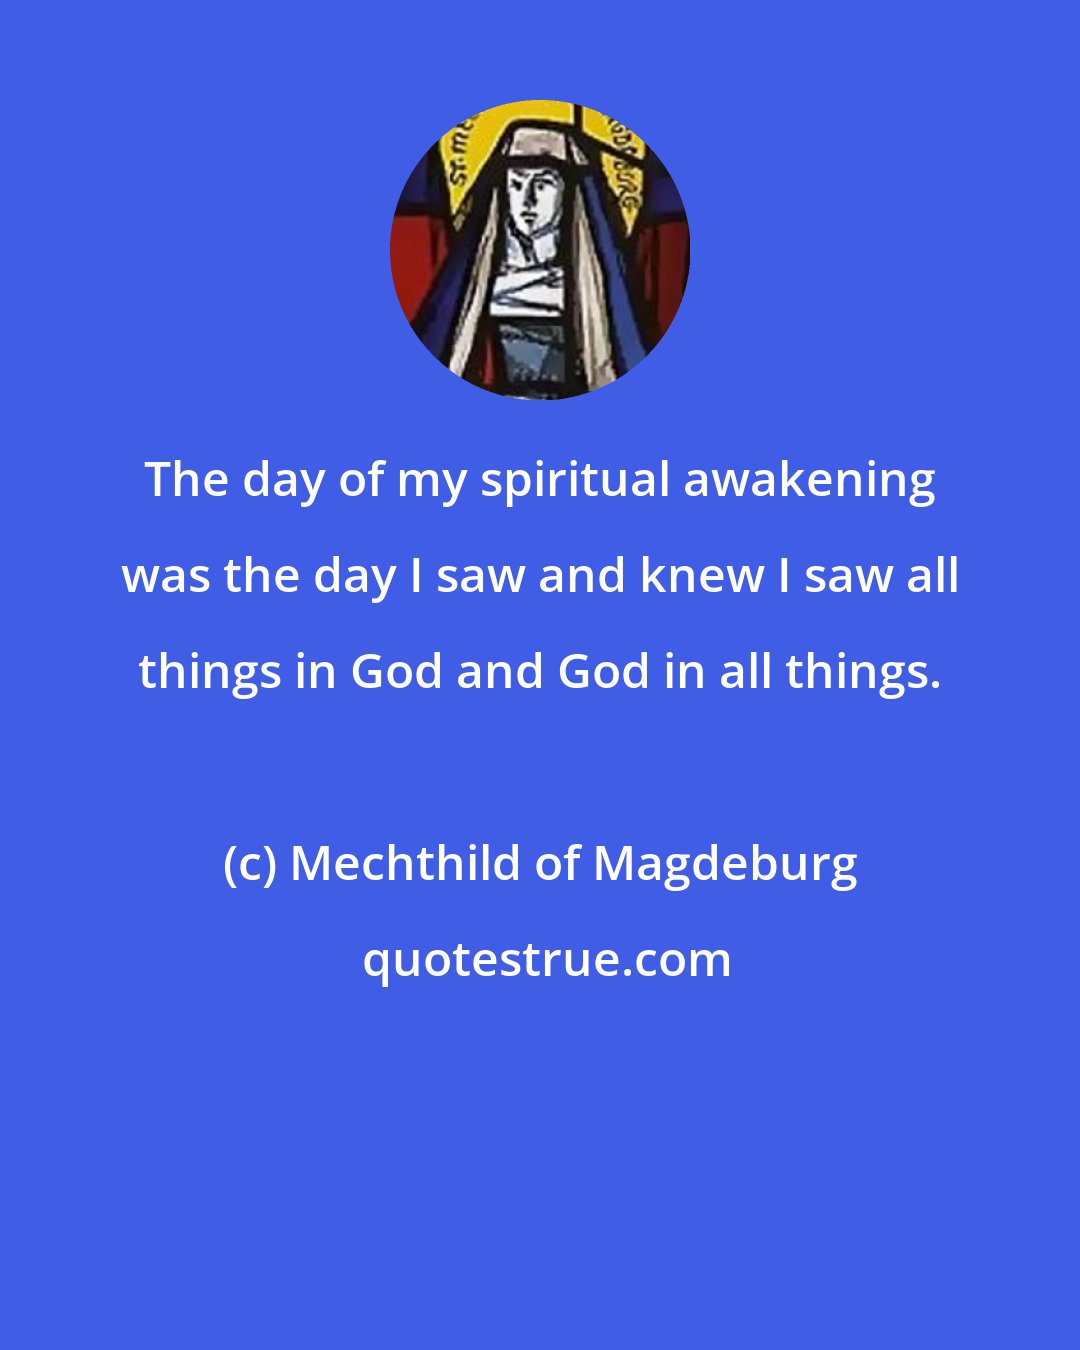 Mechthild of Magdeburg: The day of my spiritual awakening was the day I saw and knew I saw all things in God and God in all things.